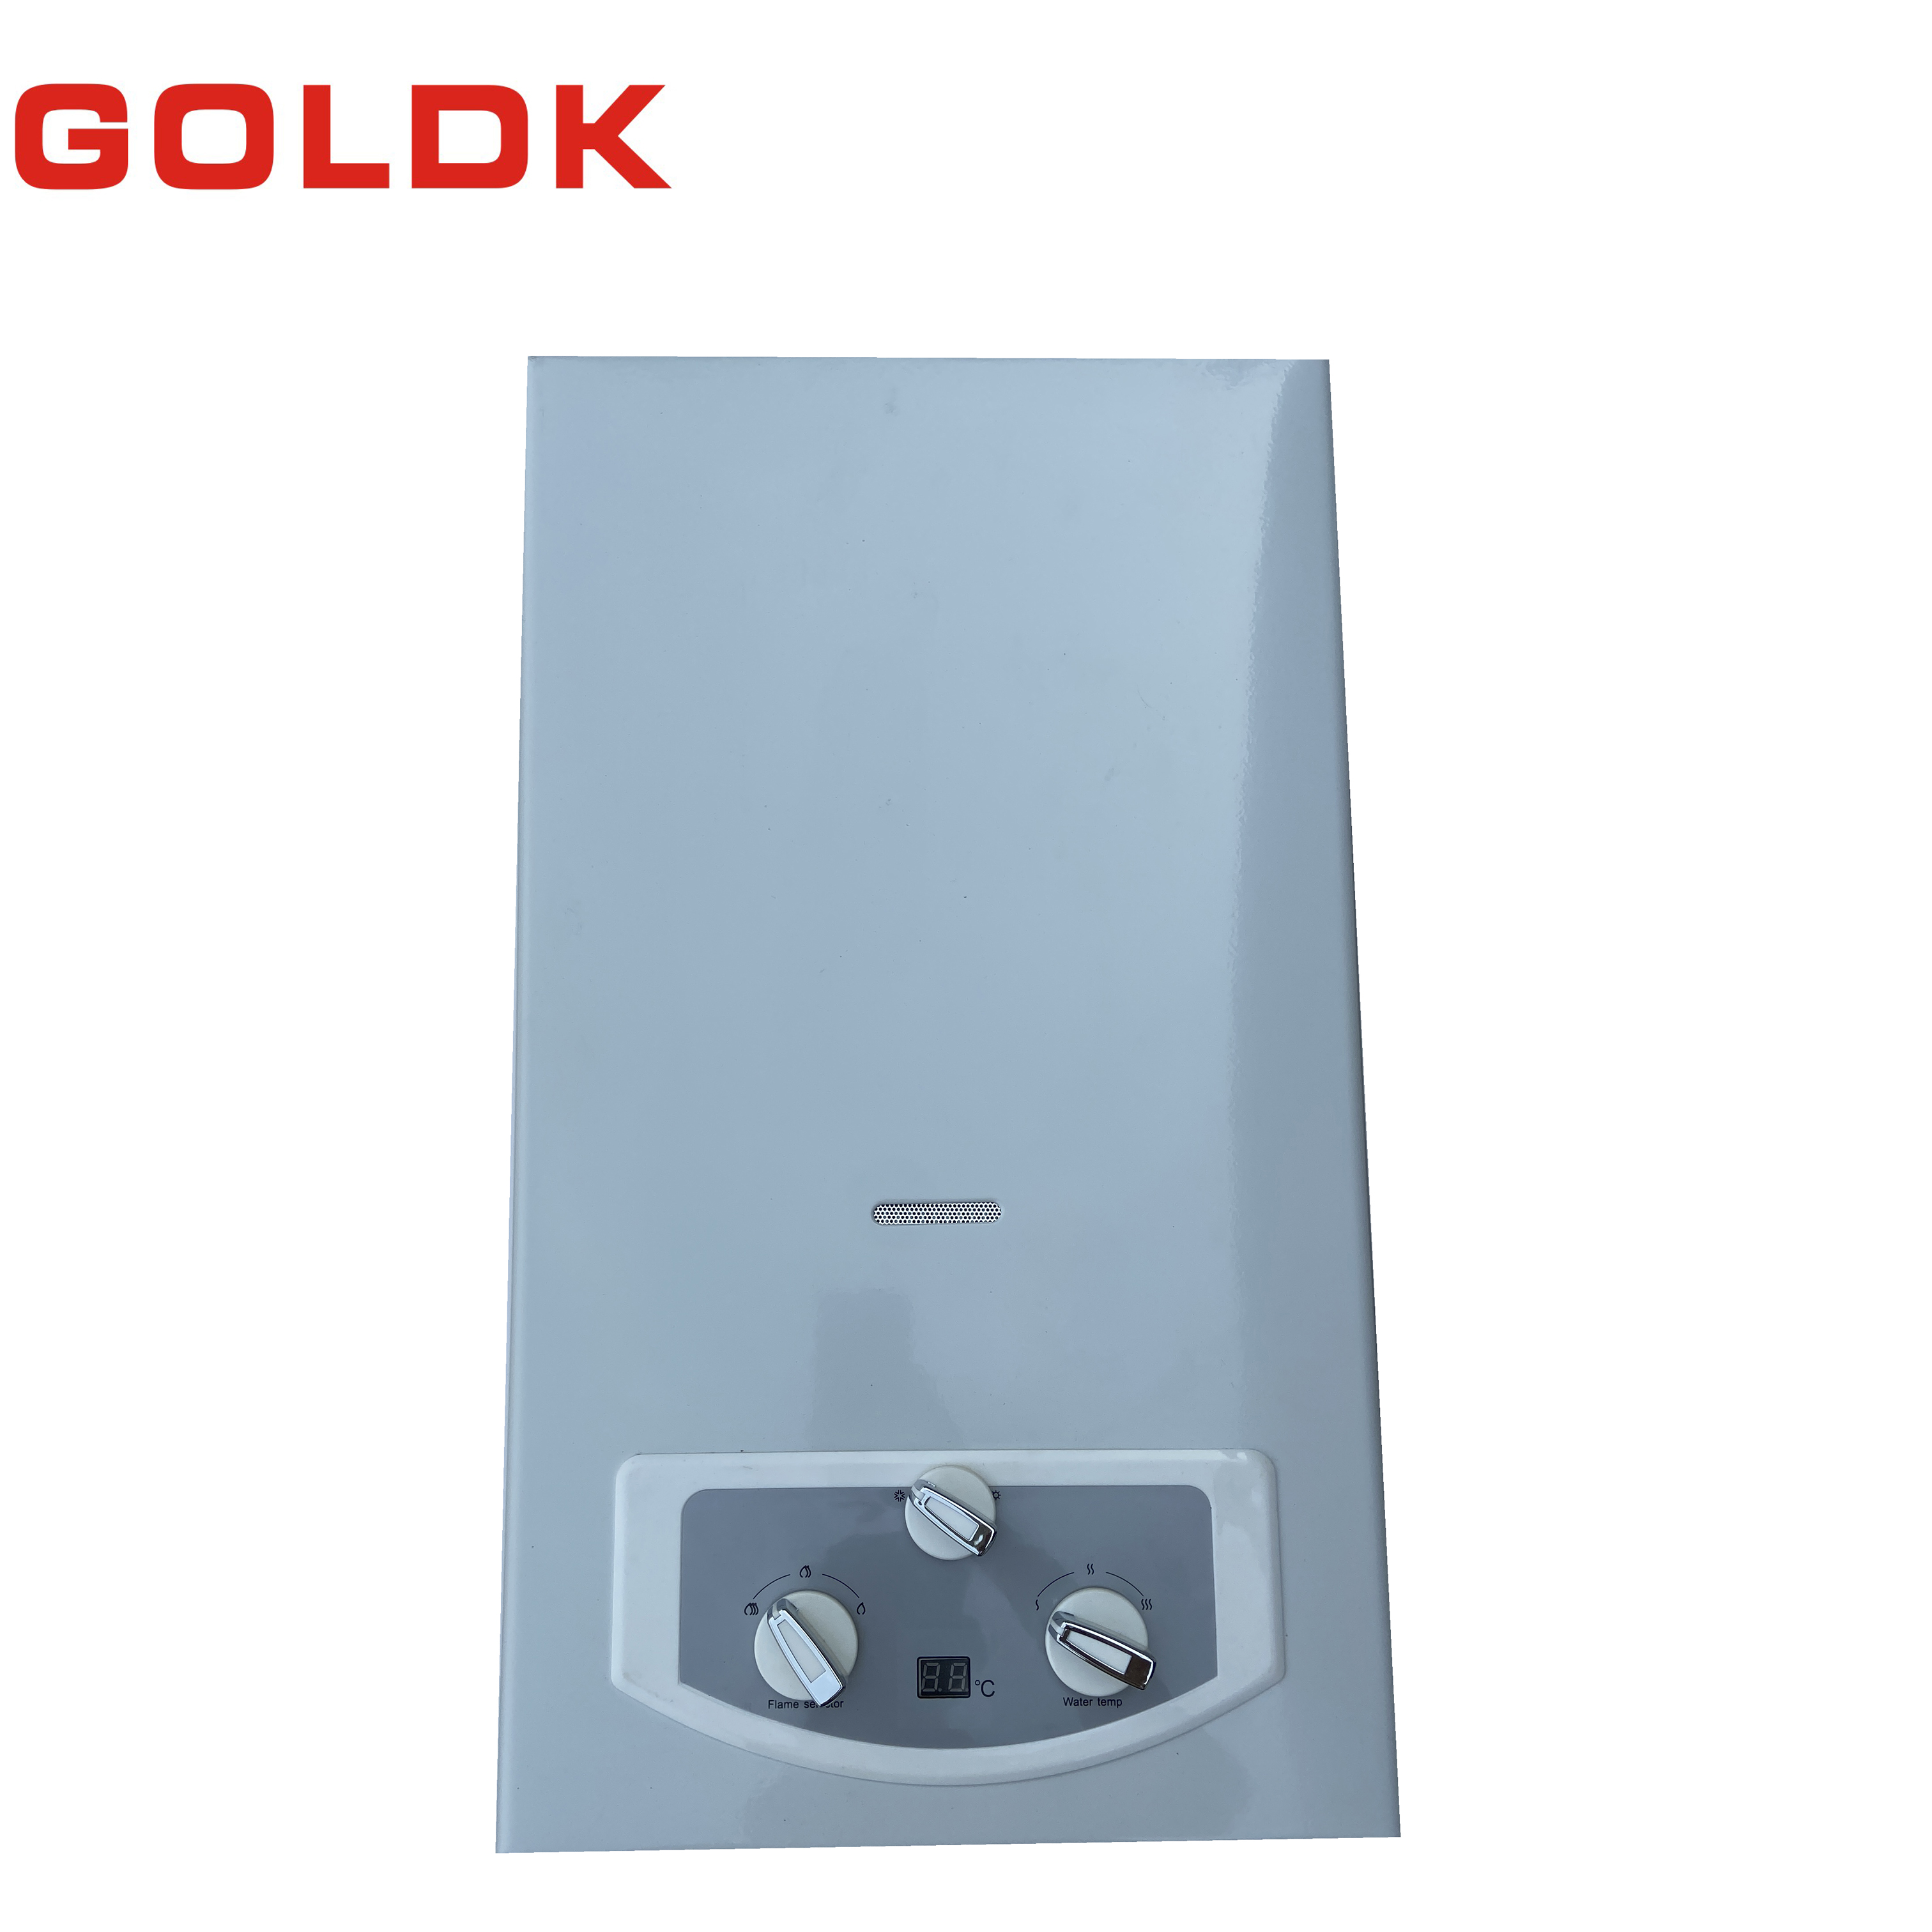 6-16 Liter Gas Water Heater. White Color Body Paiting Surface